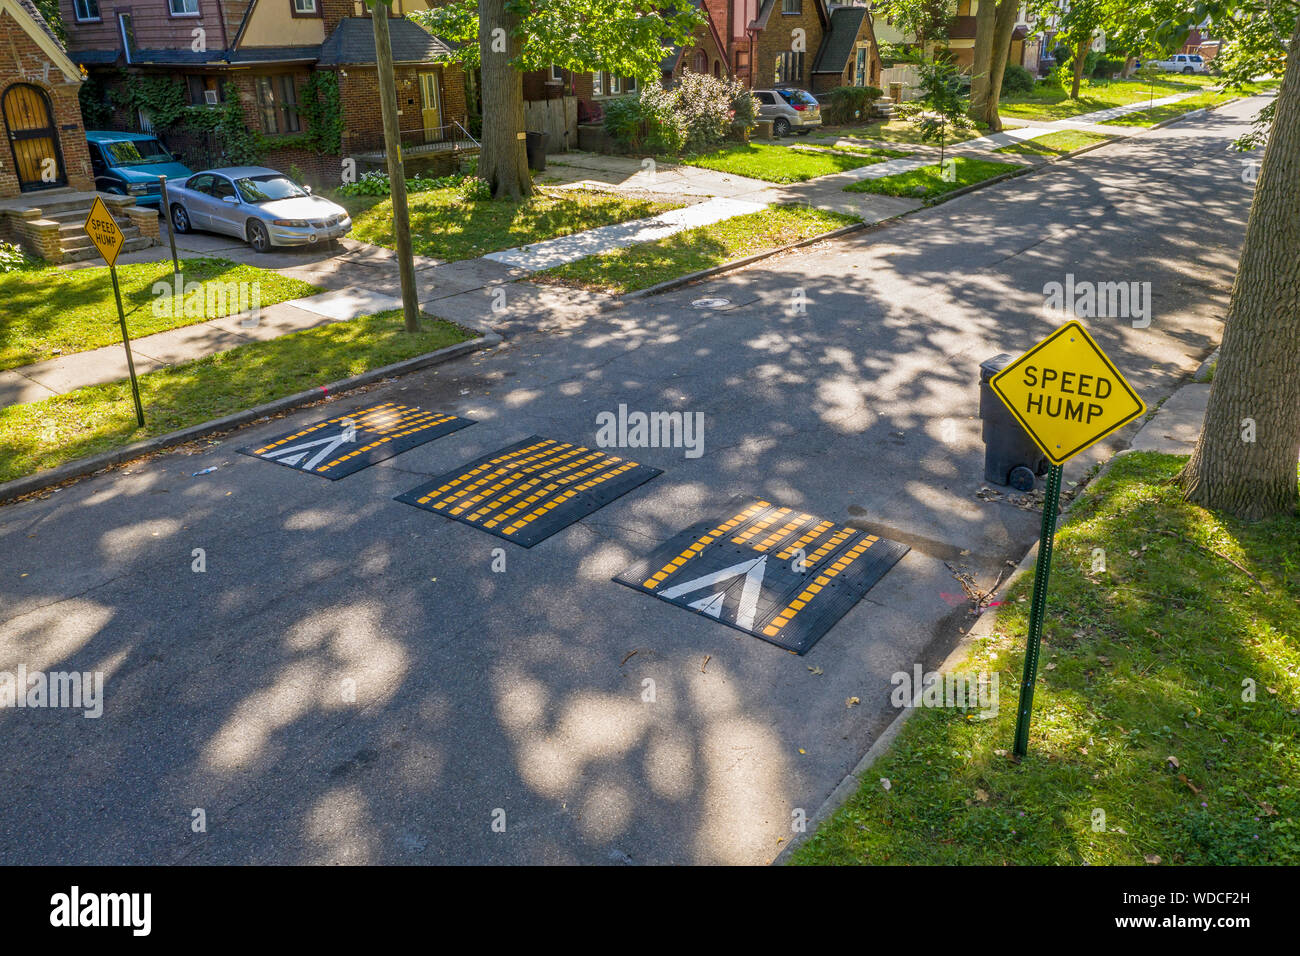 Detroit, Michigan - A 'speed hump' installed in a residential neighborhood. The city has begun installing these devices on streets where speeding has Stock Photo